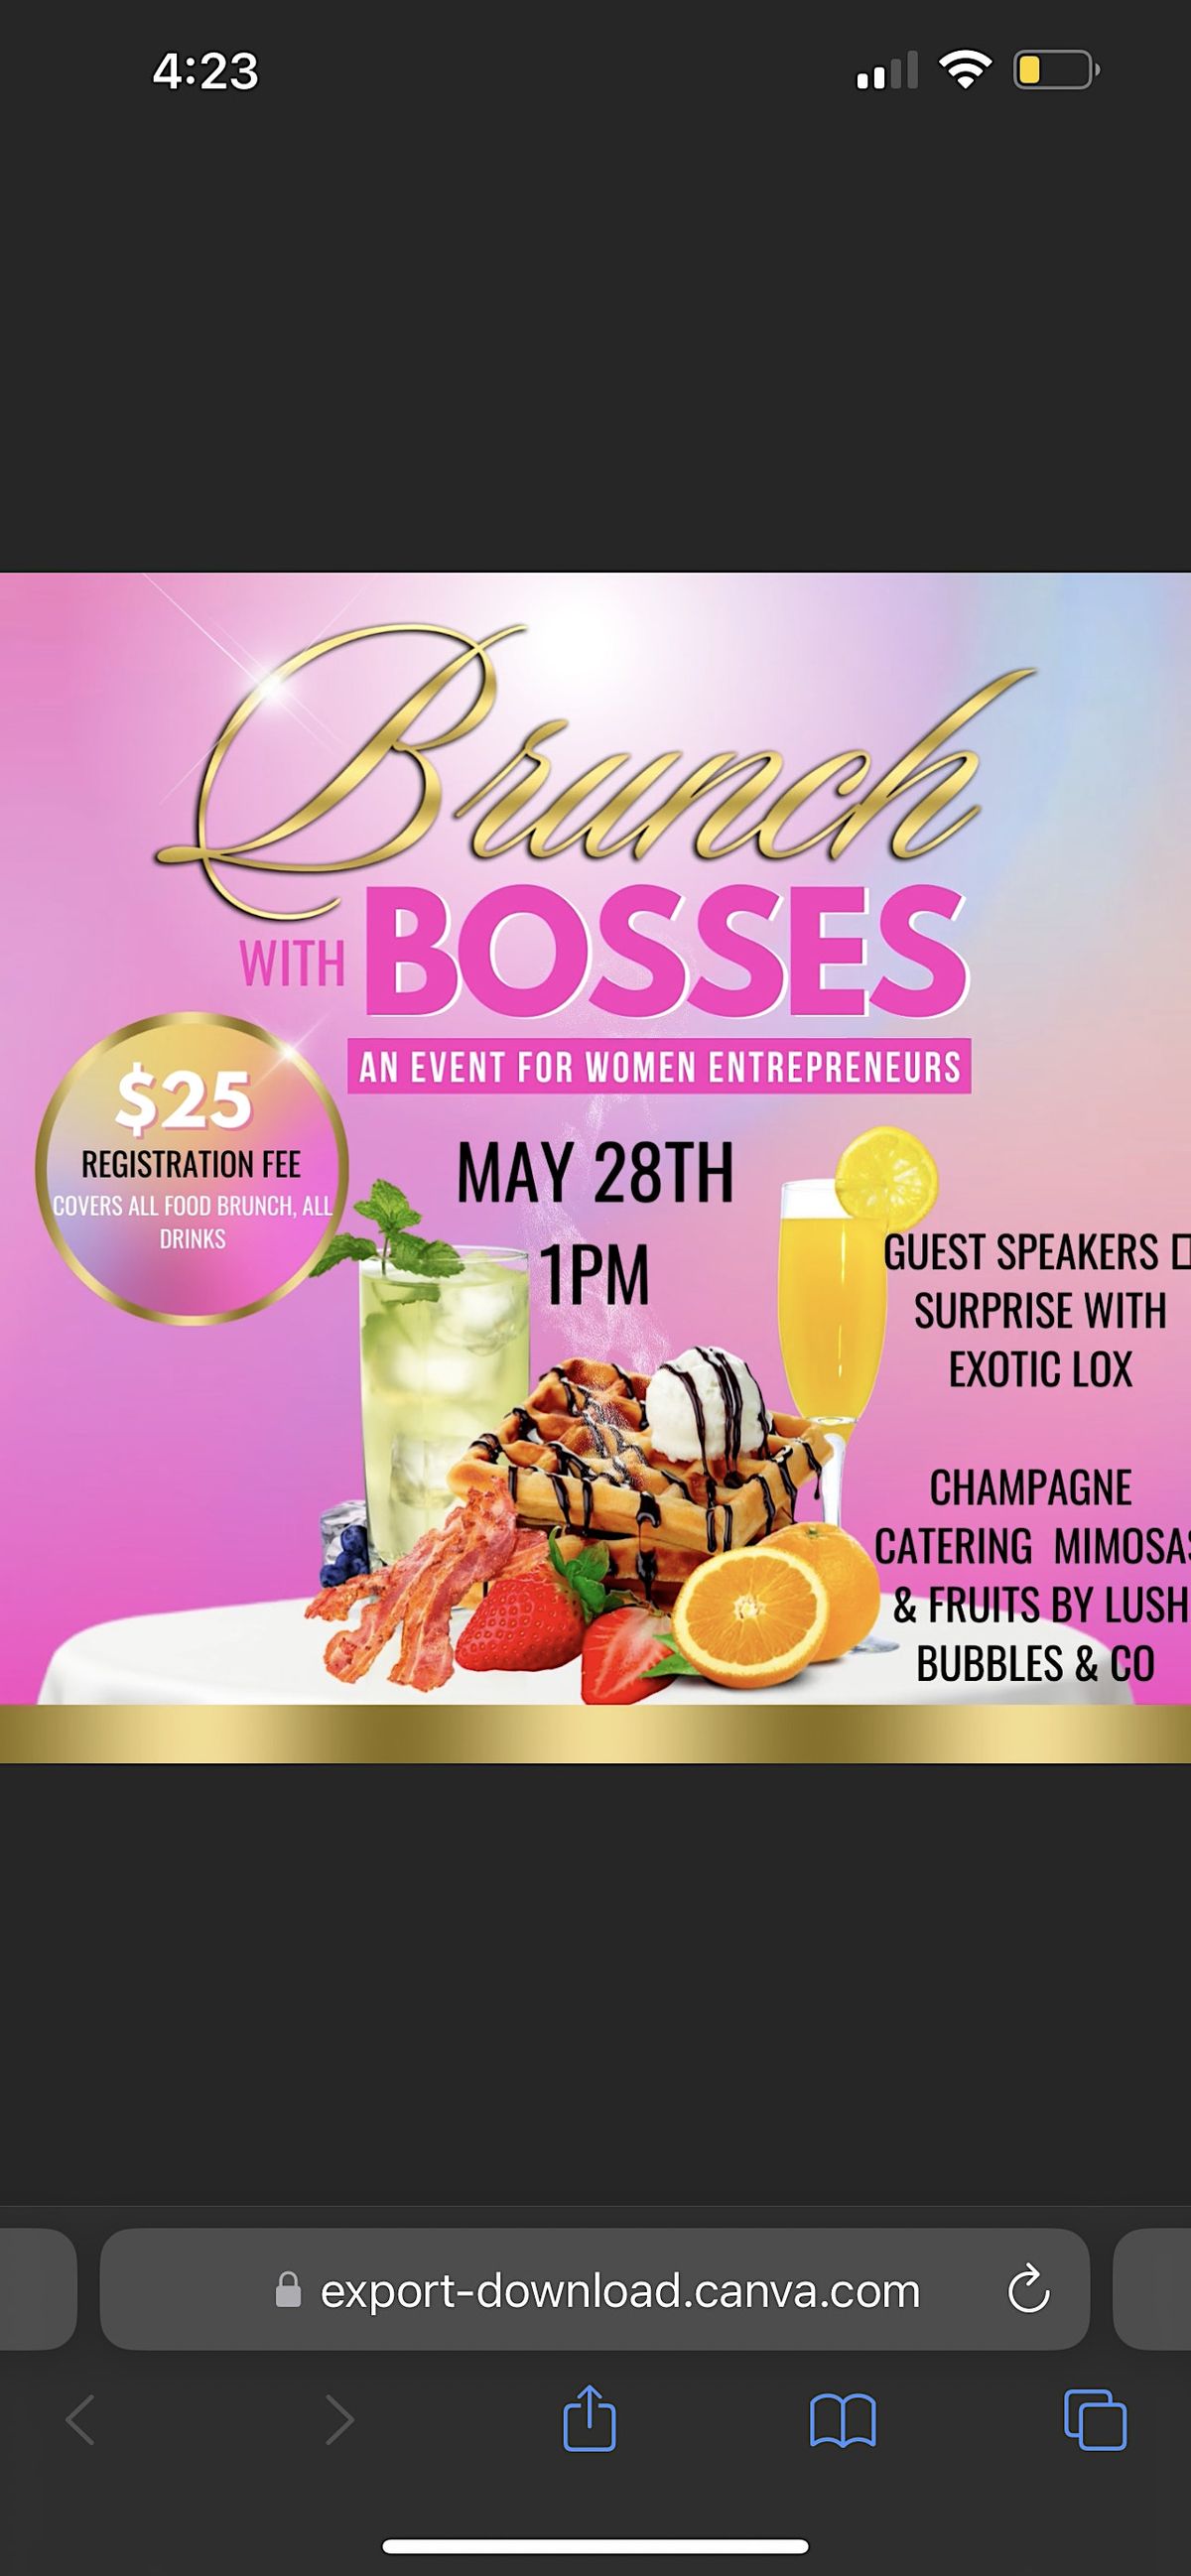 EXOTICLOX presents Brunch with bosses